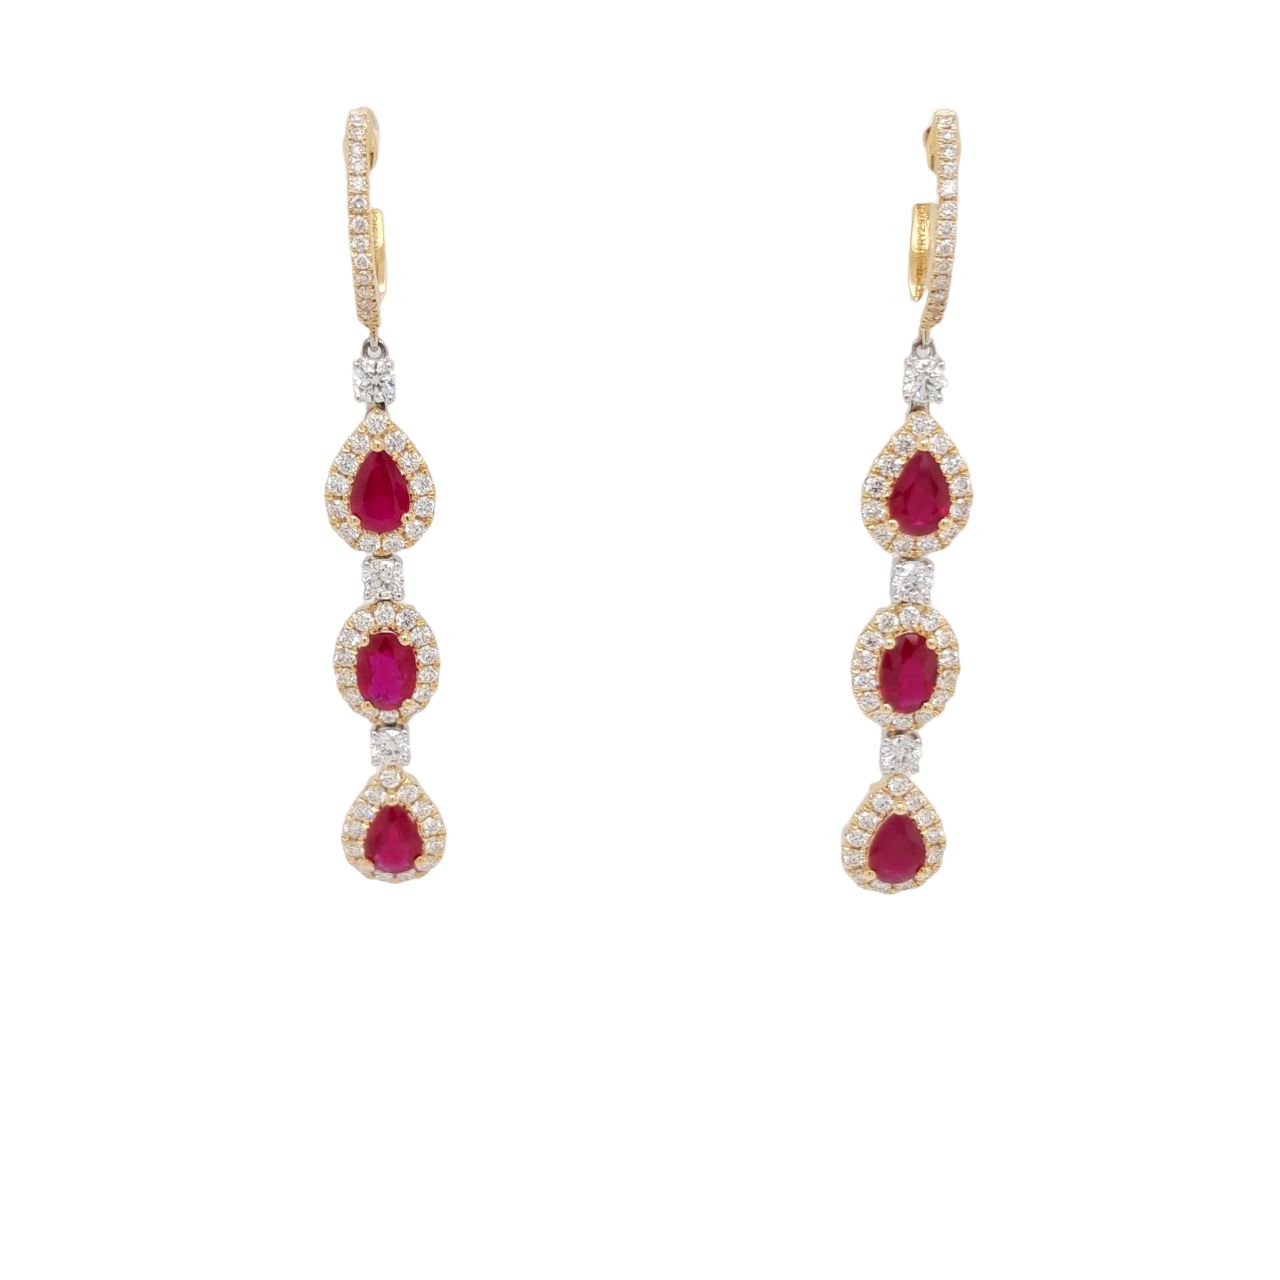 Ladies Diamond and Ruby Earrings 2.97 Carats